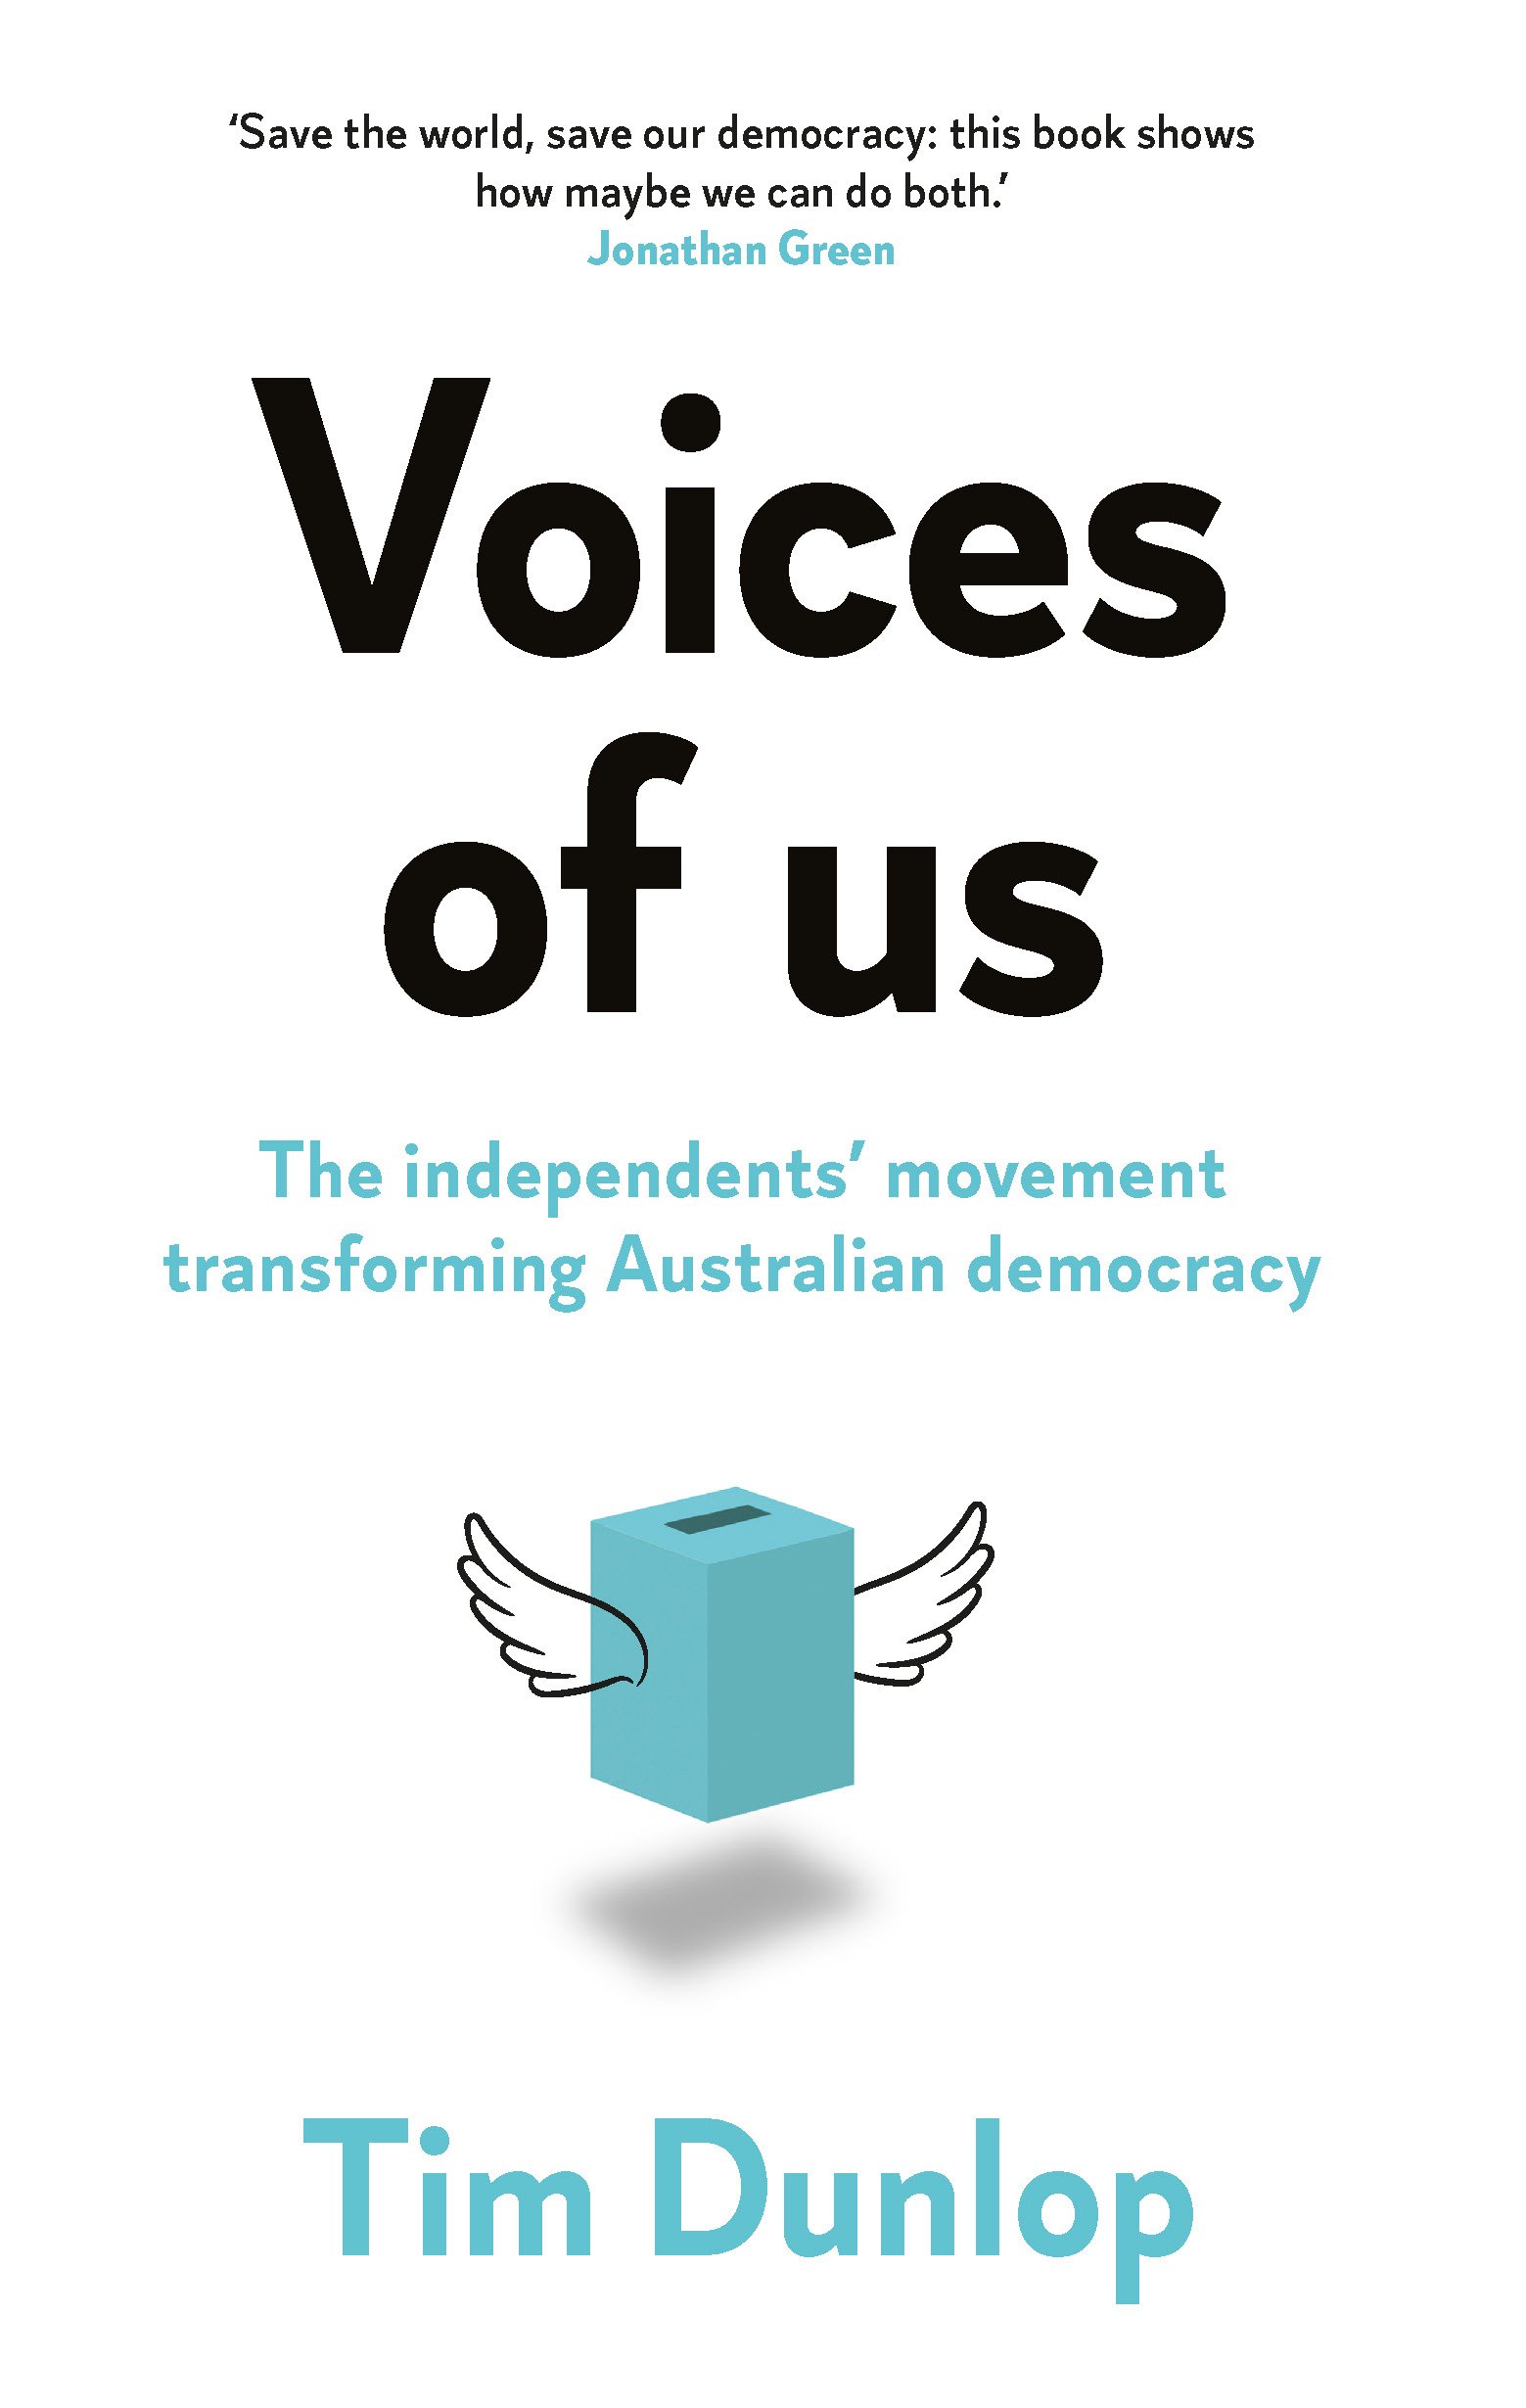 Voices of Us: The independents’ movement transforming Australian democracy